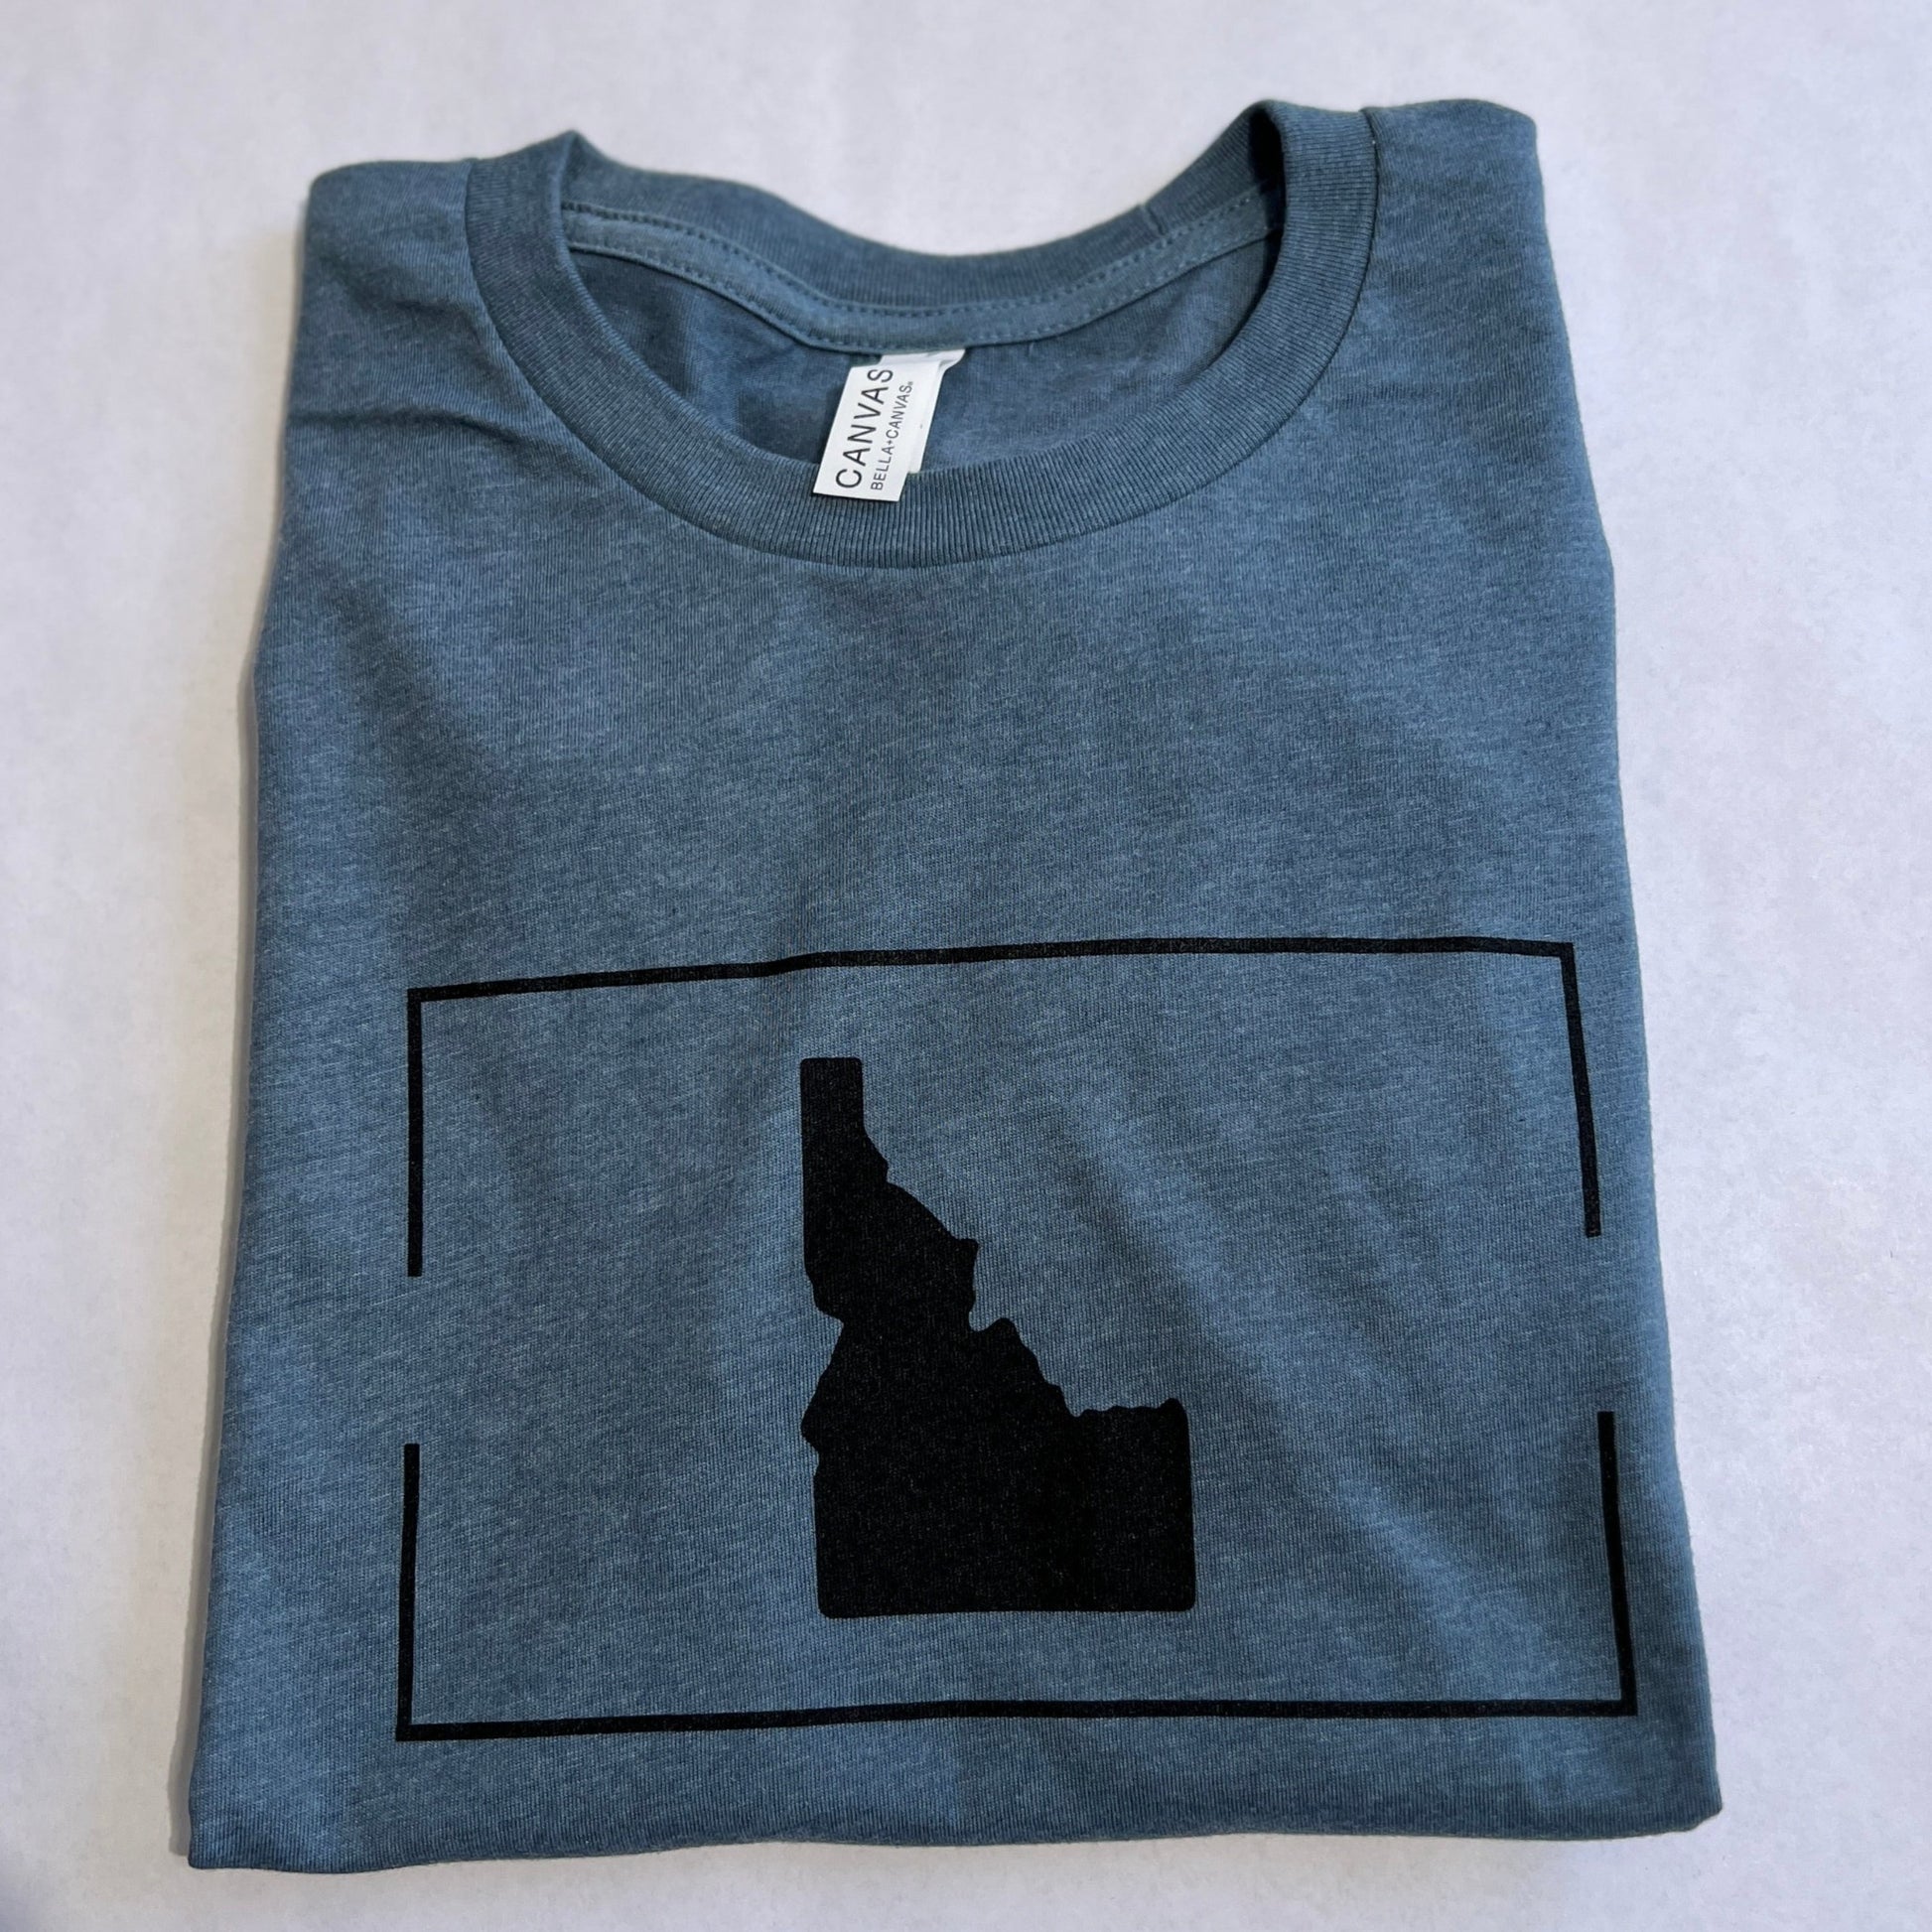 This Idaho Apparel showcases Idaho love and Idaho pride, it has an Idaho printed on the front, simple and classic. This blue is a classic blue that goes with many different outfits. Idaho shirts represent the love you have for Idaho, whether you are visiting Idaho or living in Idaho show your love for Idaho with this Idaho T shirt. All Idaho T shirts are screen printed in Idaho.